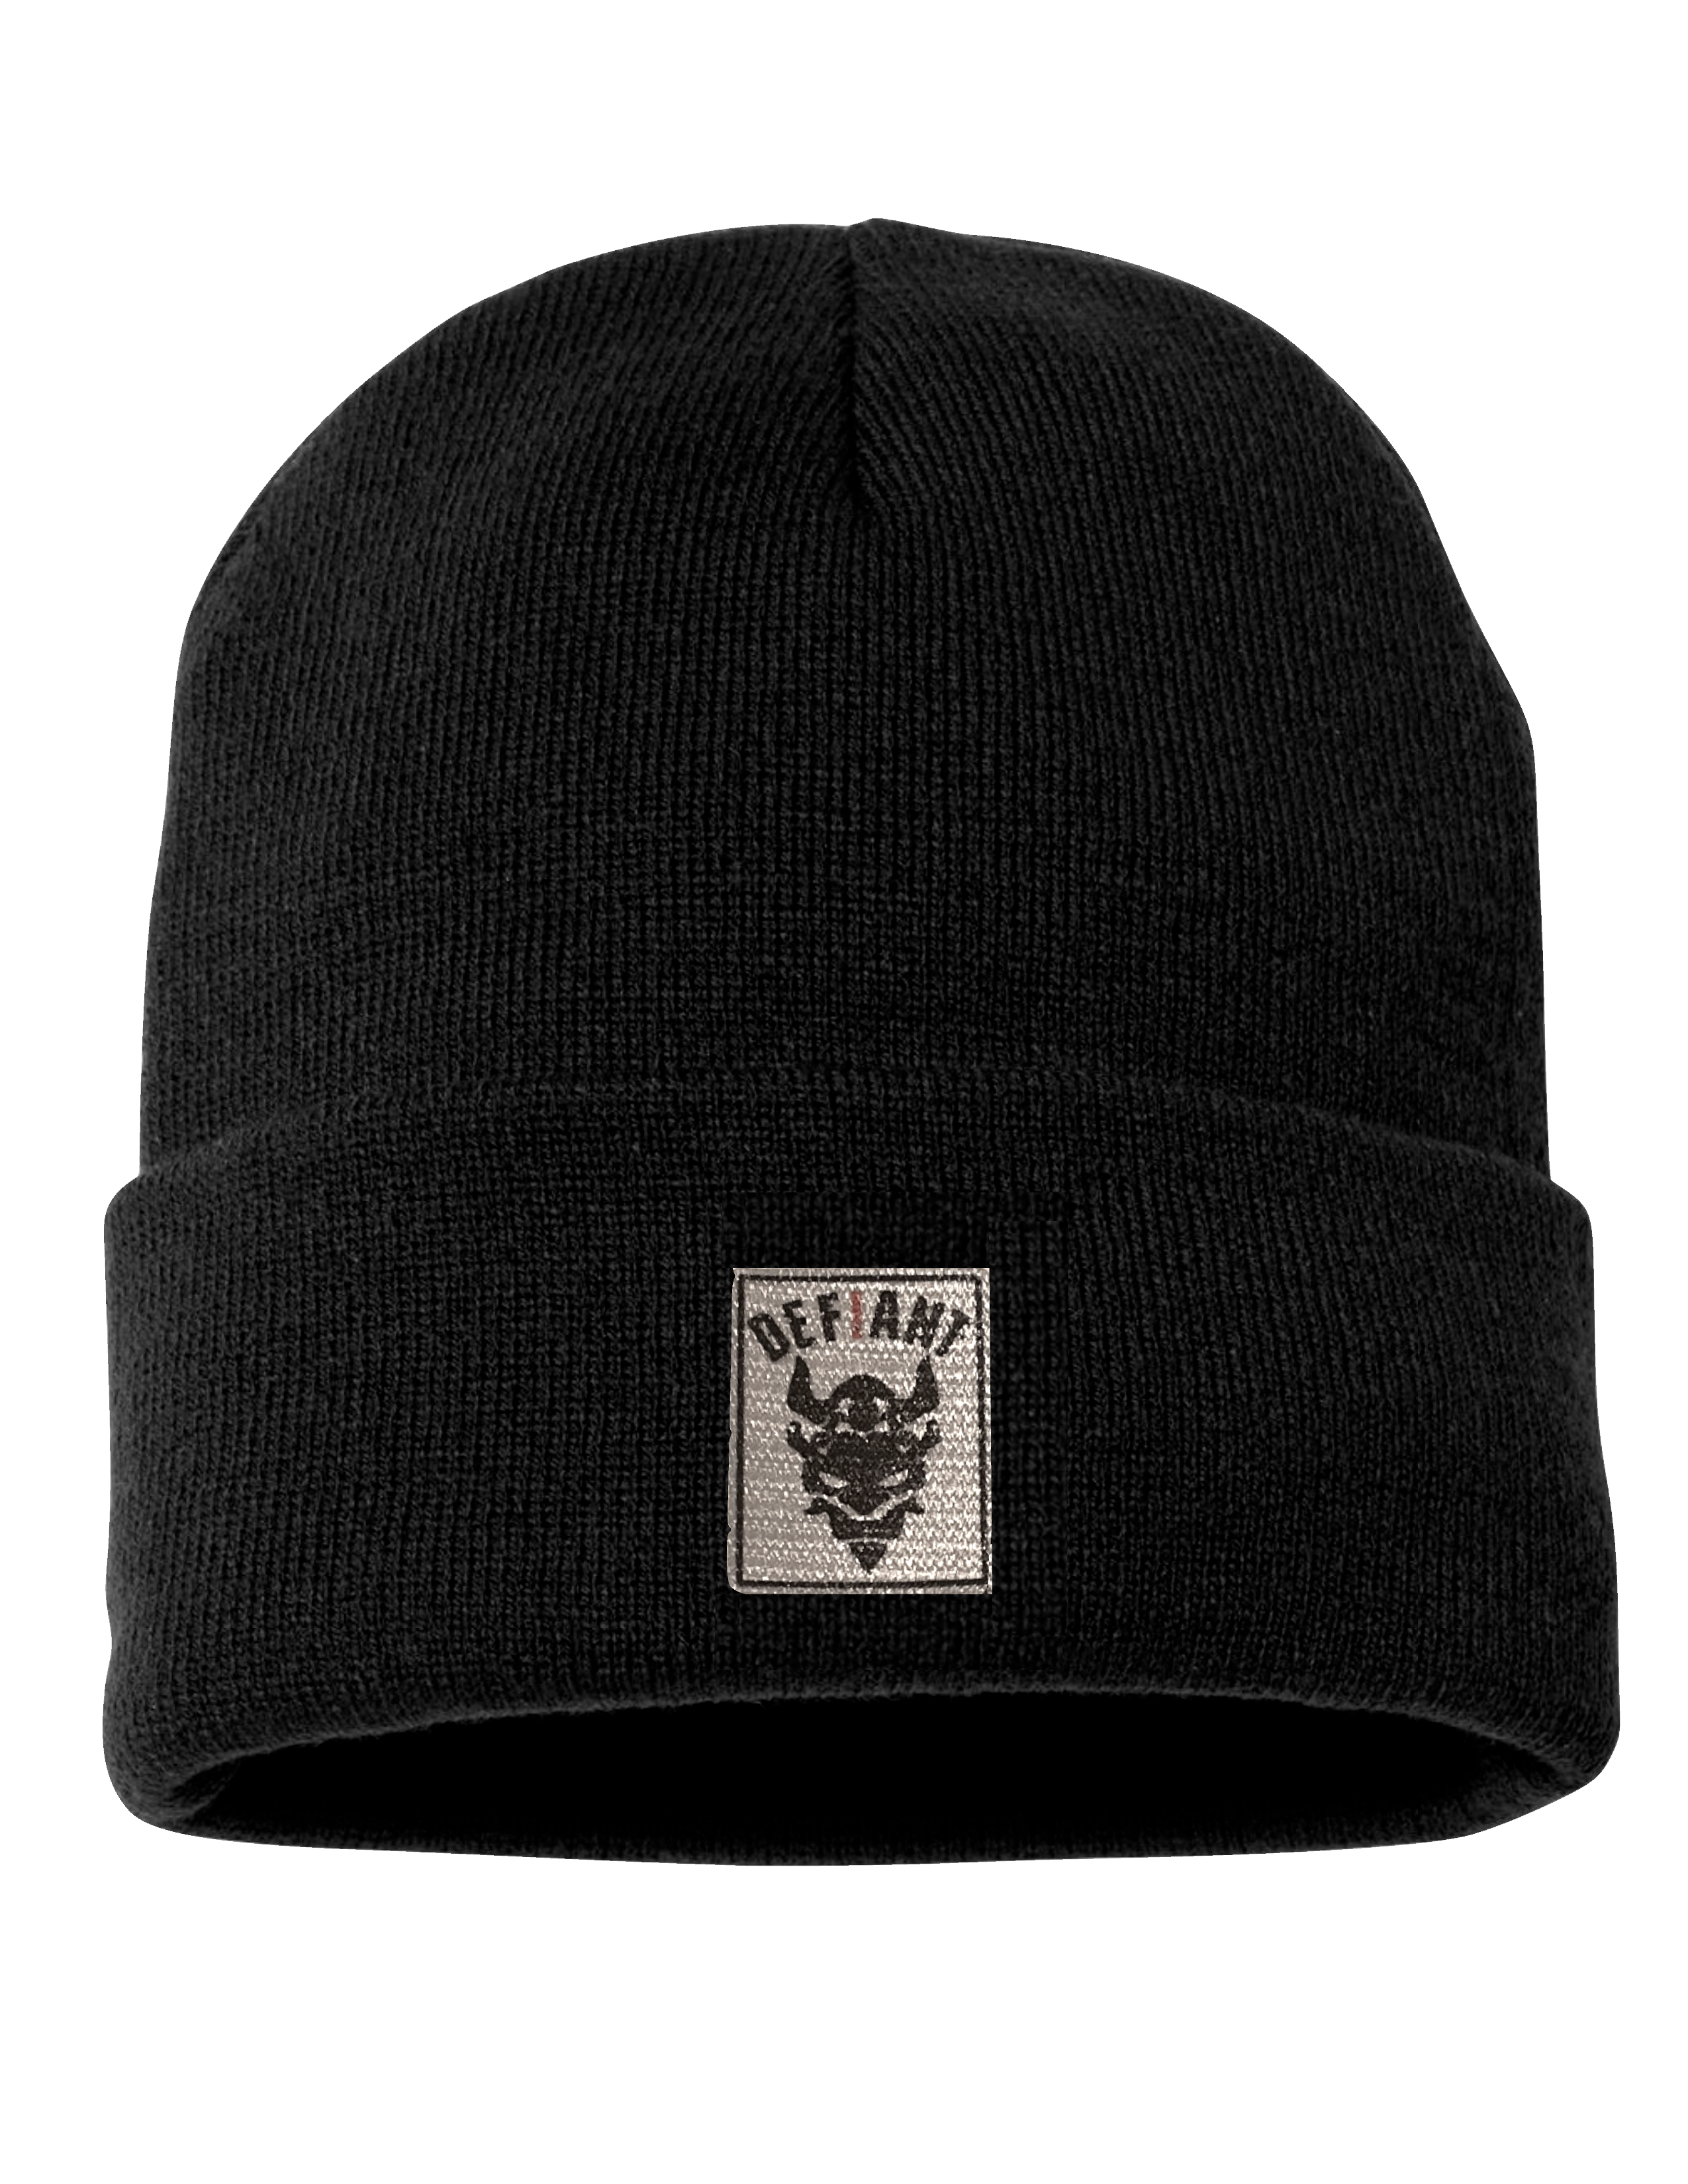 CLASSIC CUFFED BEANIE HAT - WITH TEXTURED TWILL PATCH - BLACK - LTD STOCK